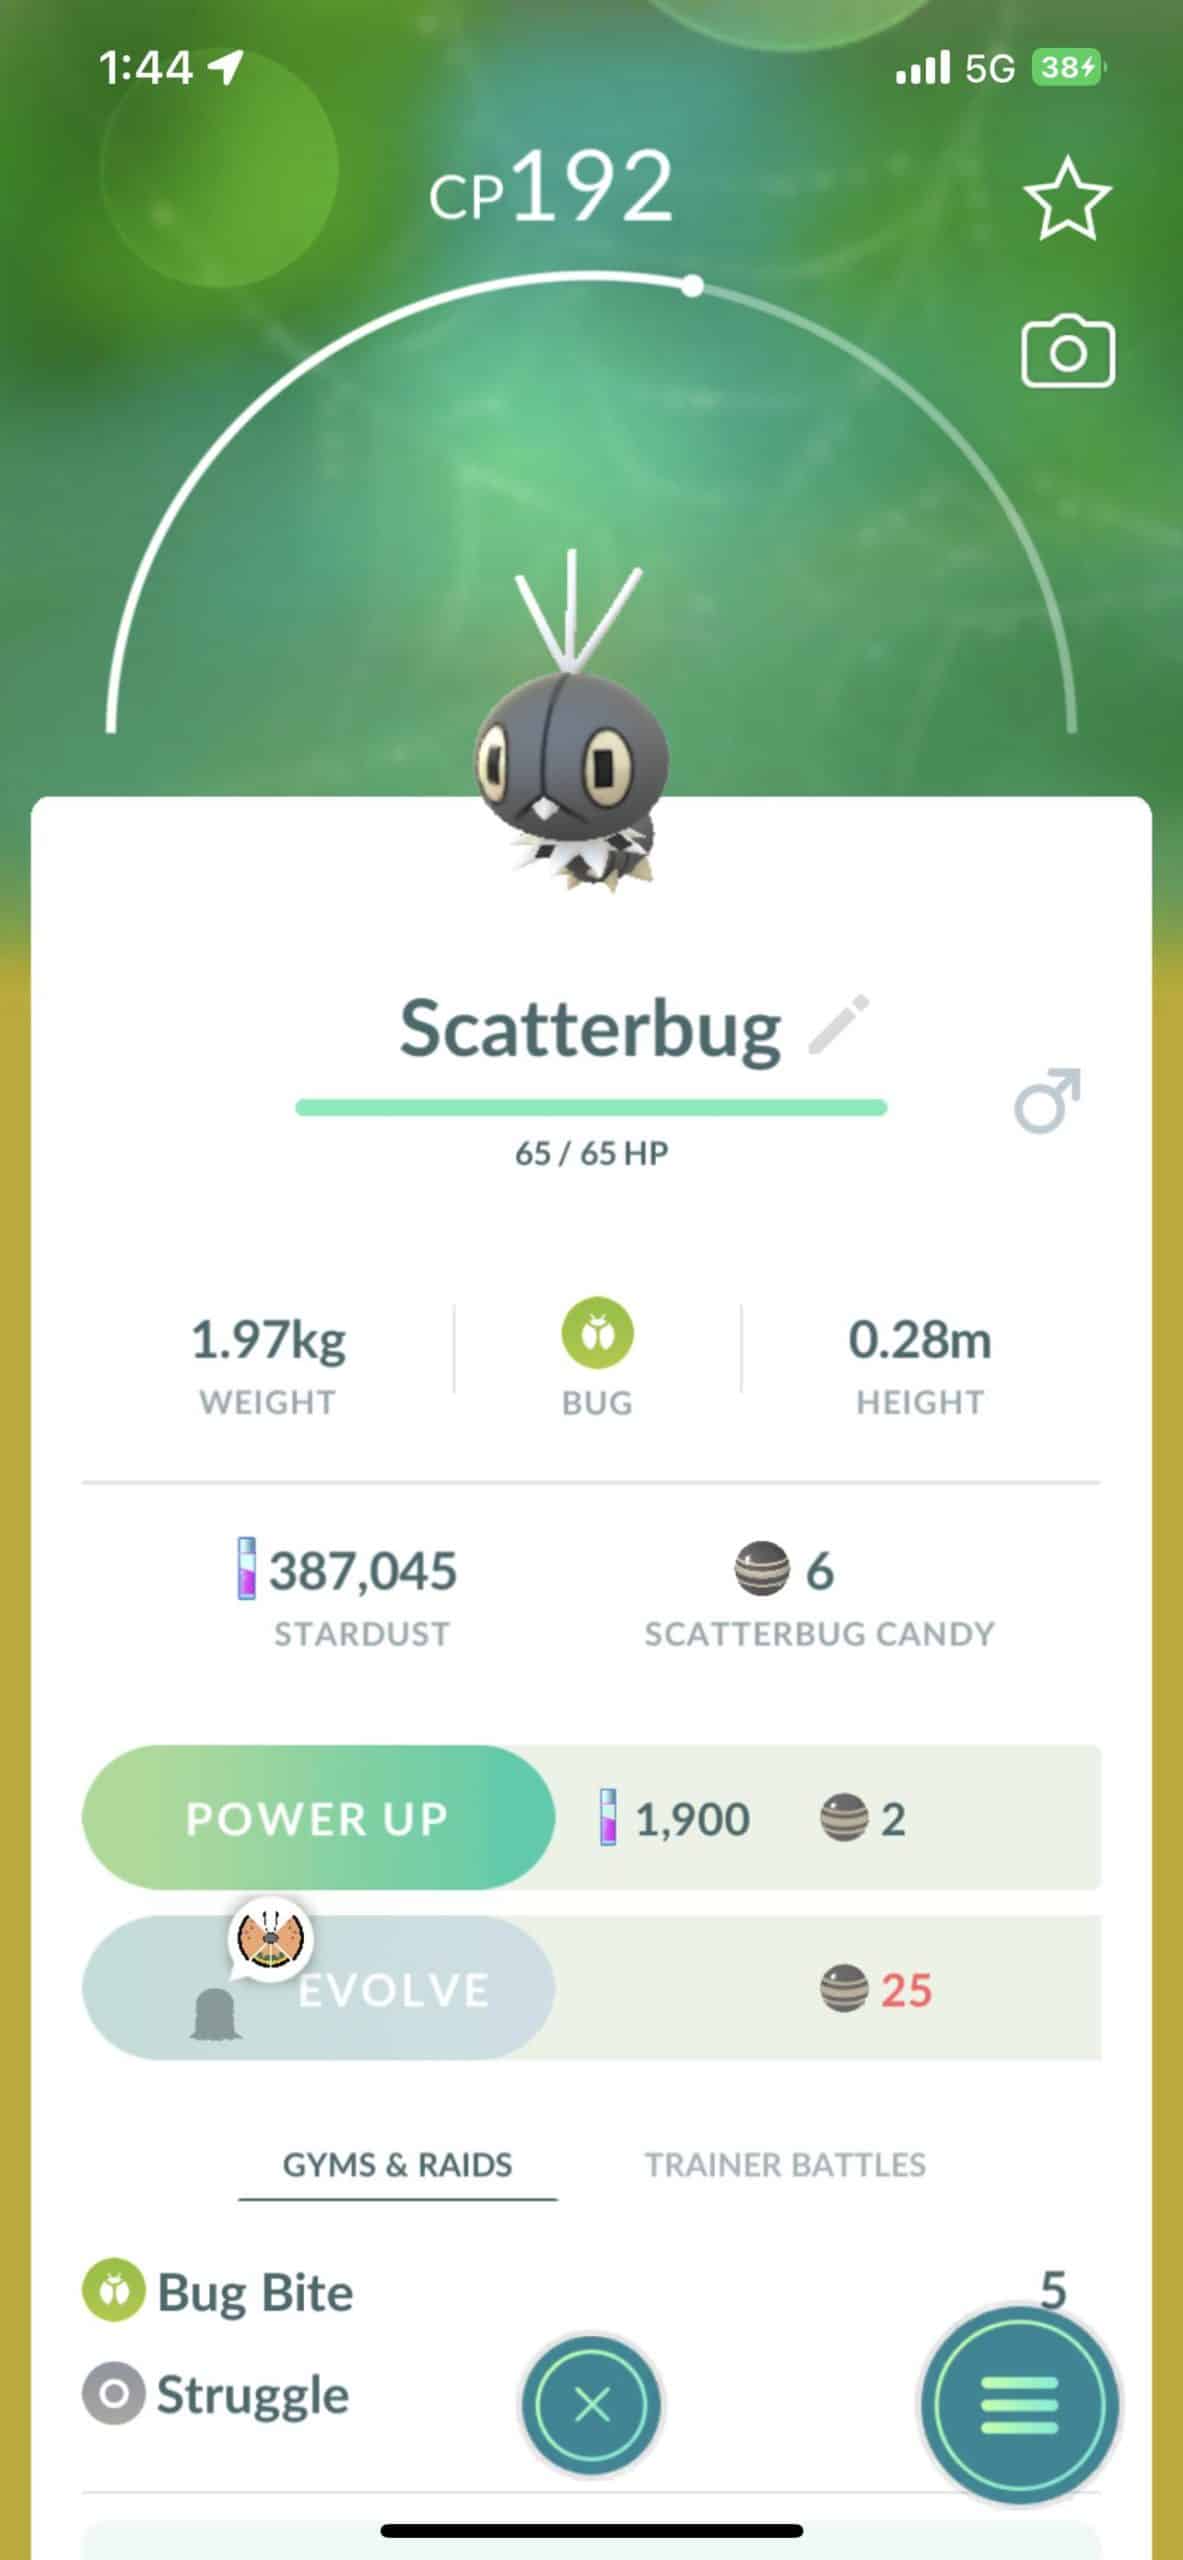 Scatterbug's details screen shows which Vivillon pattern it will evolve into